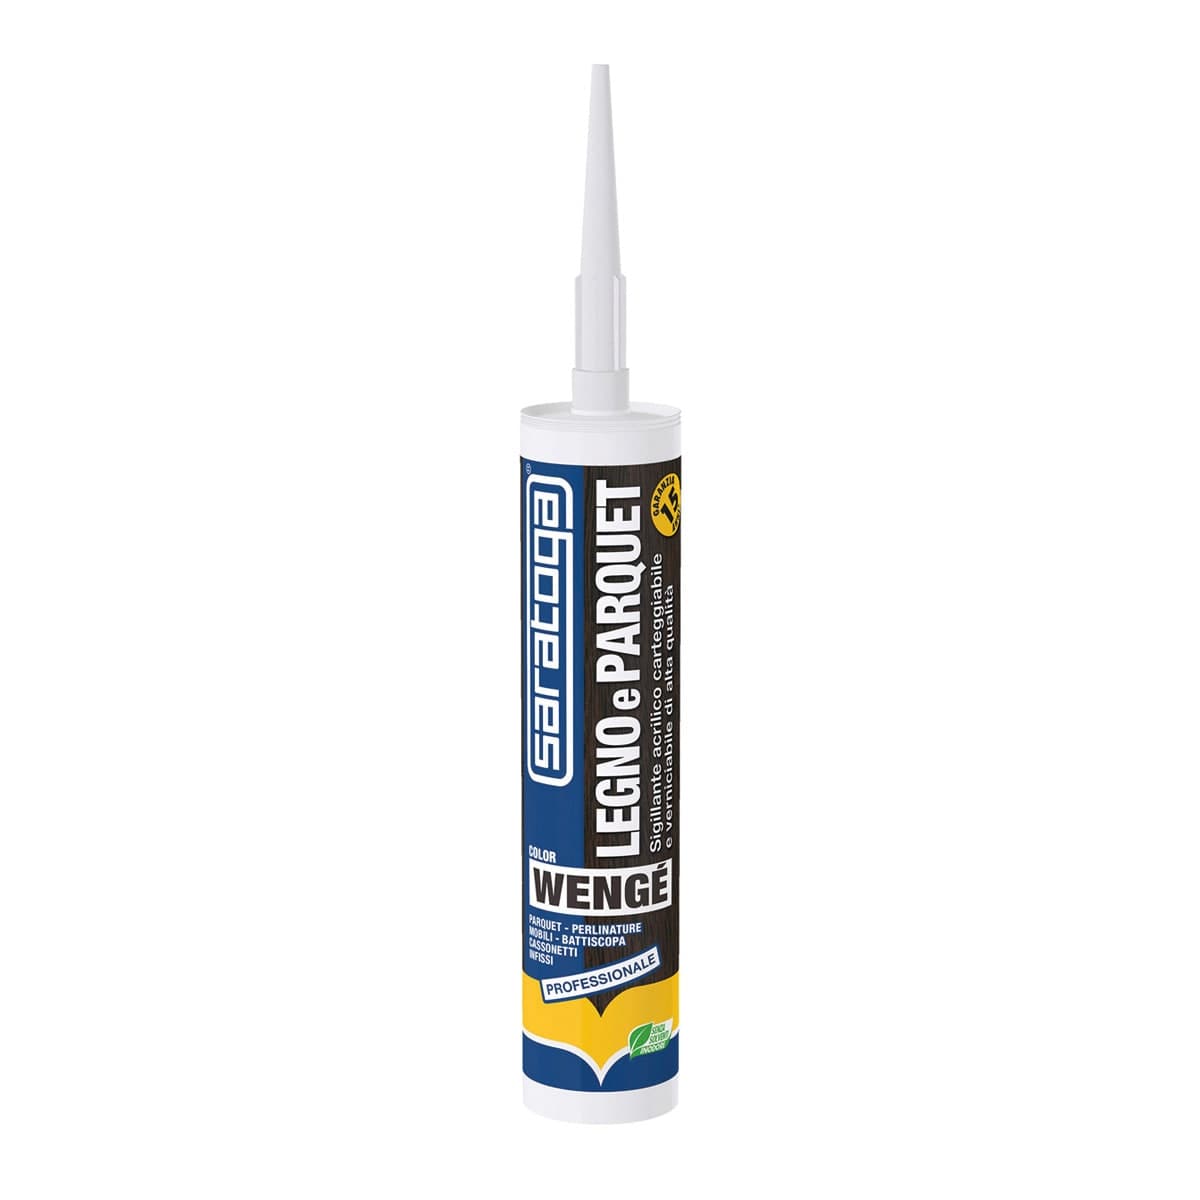 SEALANT FOR WOOD AND PARQUET WENGE' 310 ML - best price from Maltashopper.com BR470003690